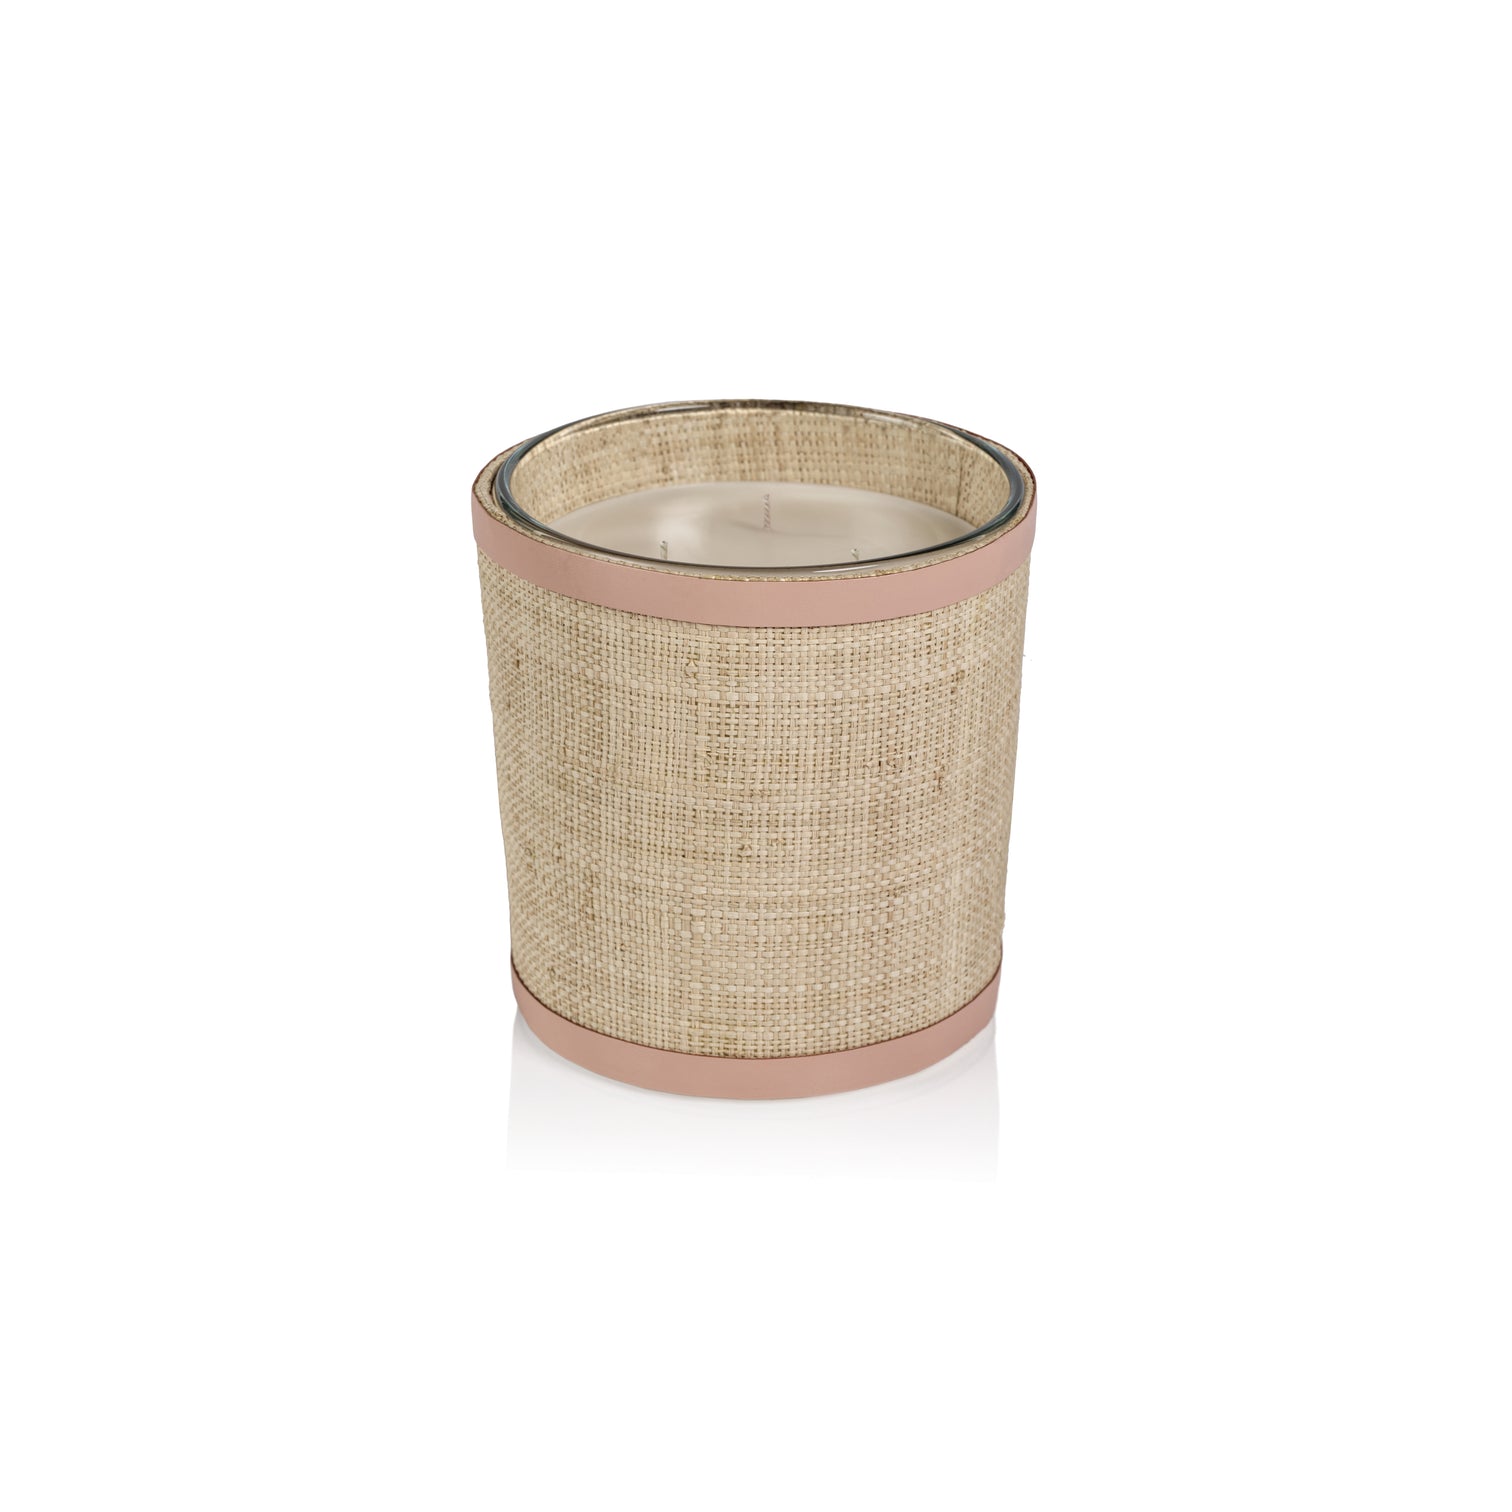 Candle in Natural Raffia Basket w/ Leather Trim - Pink